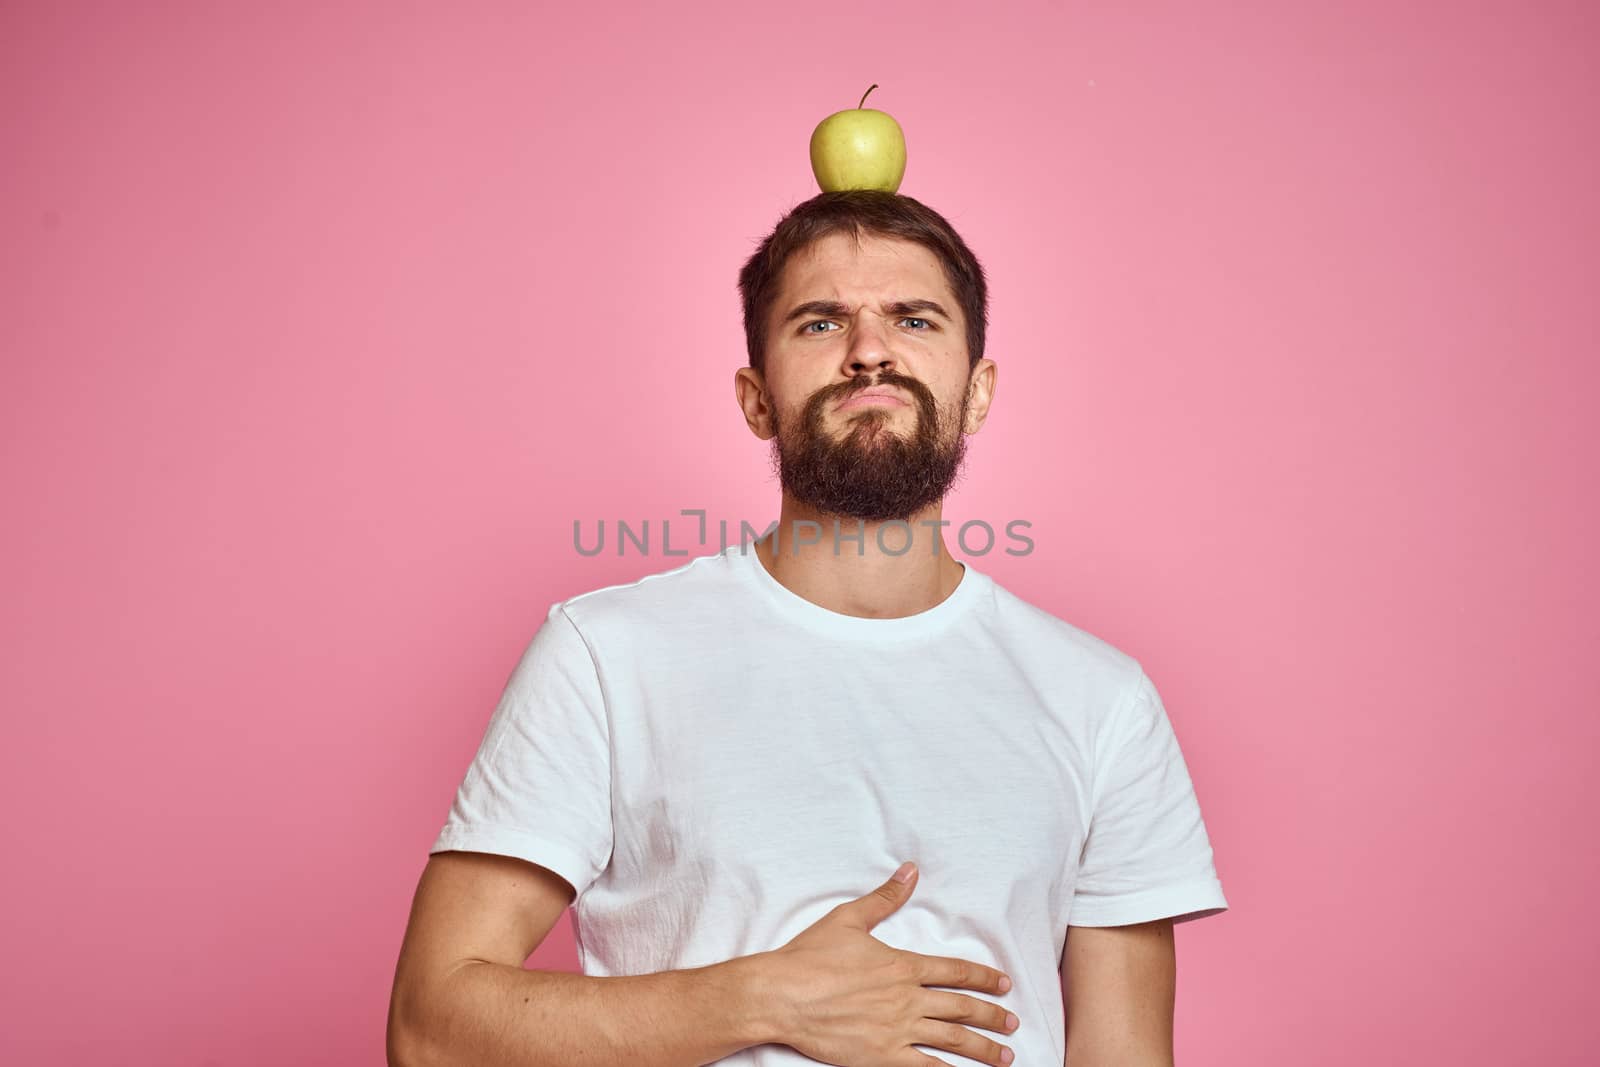 Cute man with an apple on a pink background gestures with his hands cropped white T-shirt Copy Space. High quality photo